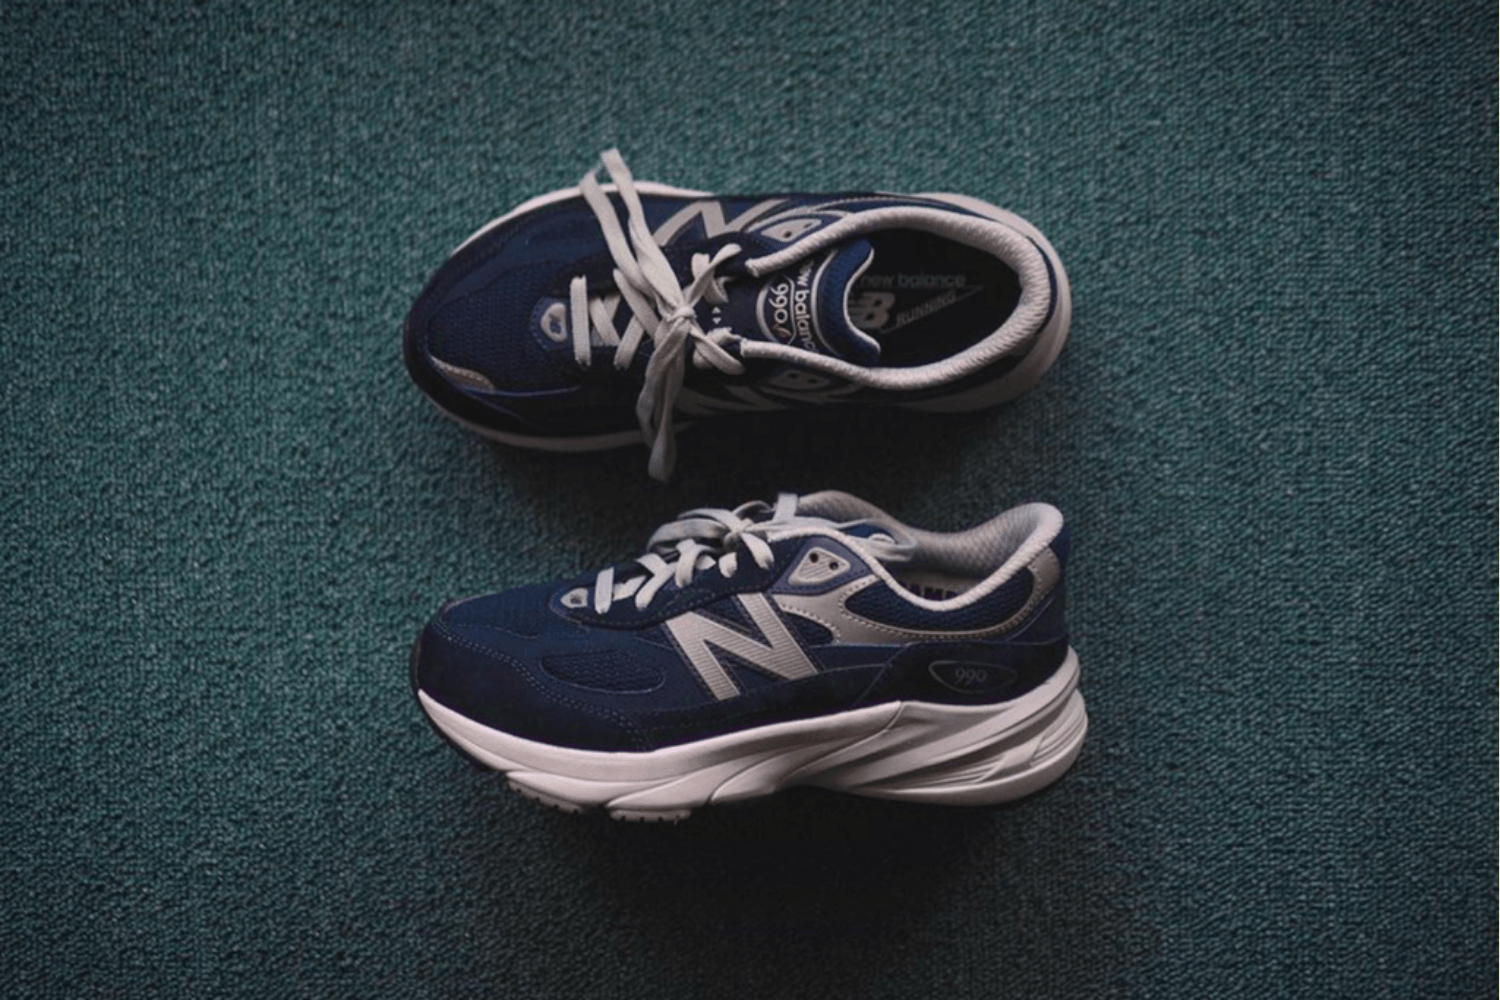 The New Balance 990v6 wil drop in a 'Navy' colorway